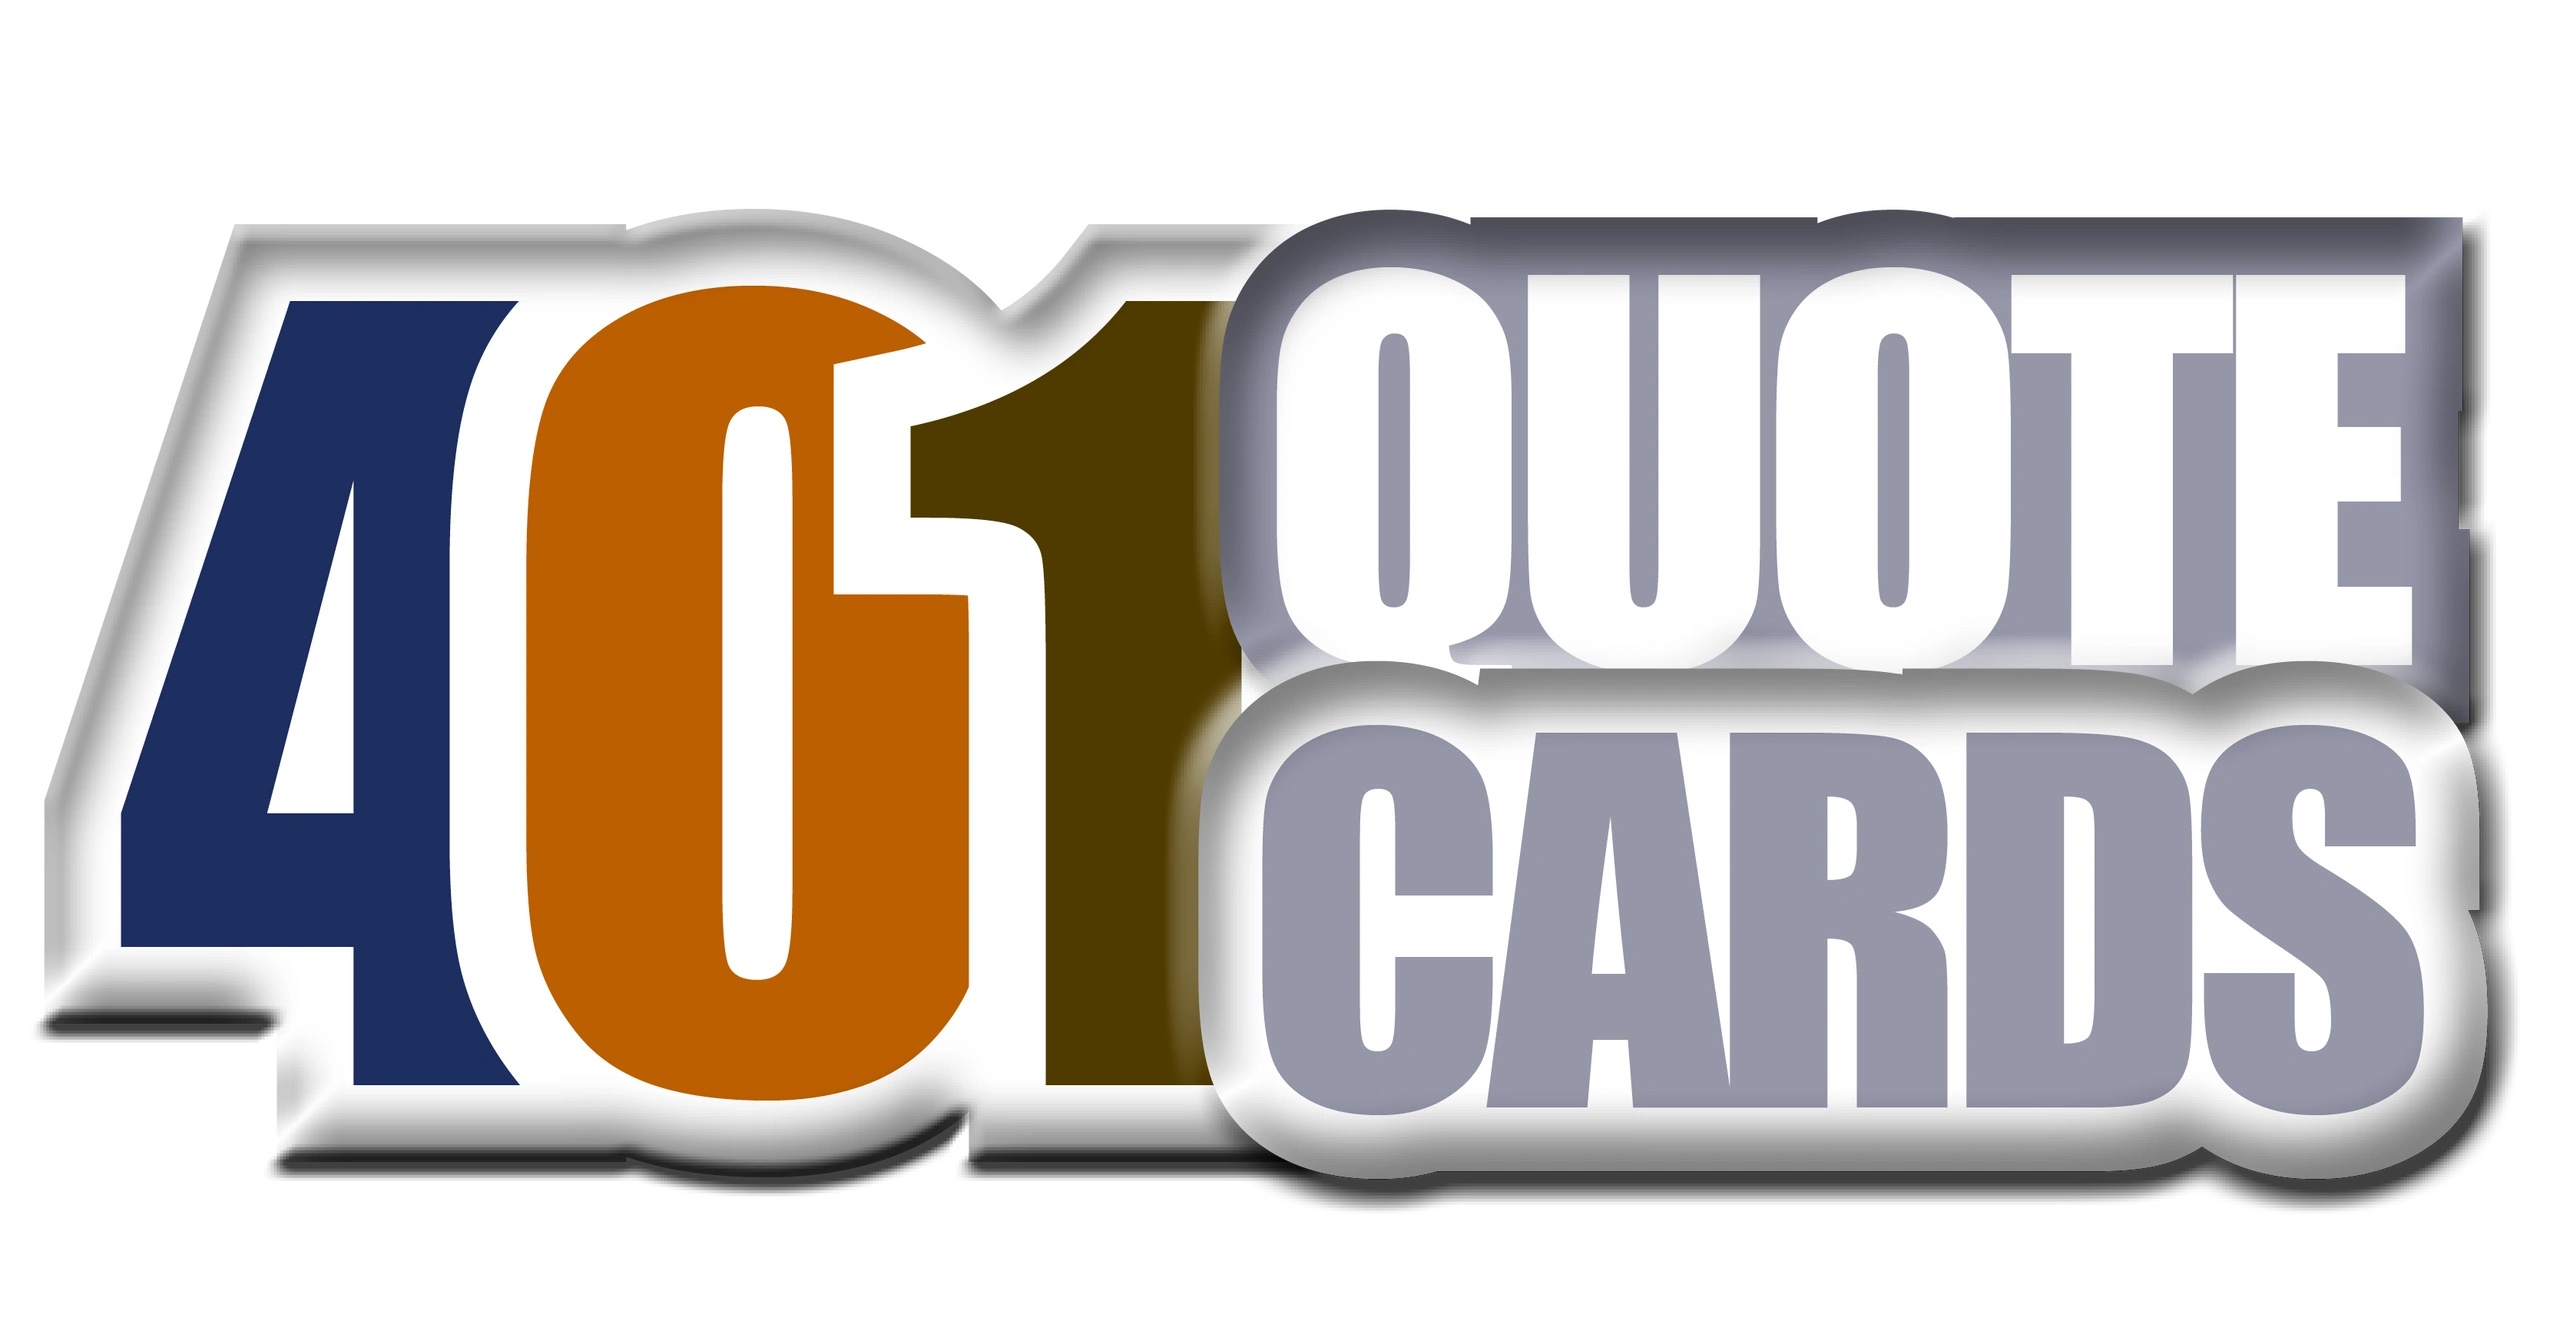 401 Quote Cards original logo.  2000 quotes from history's great minds.  The 401 Book. Genpopmedia.